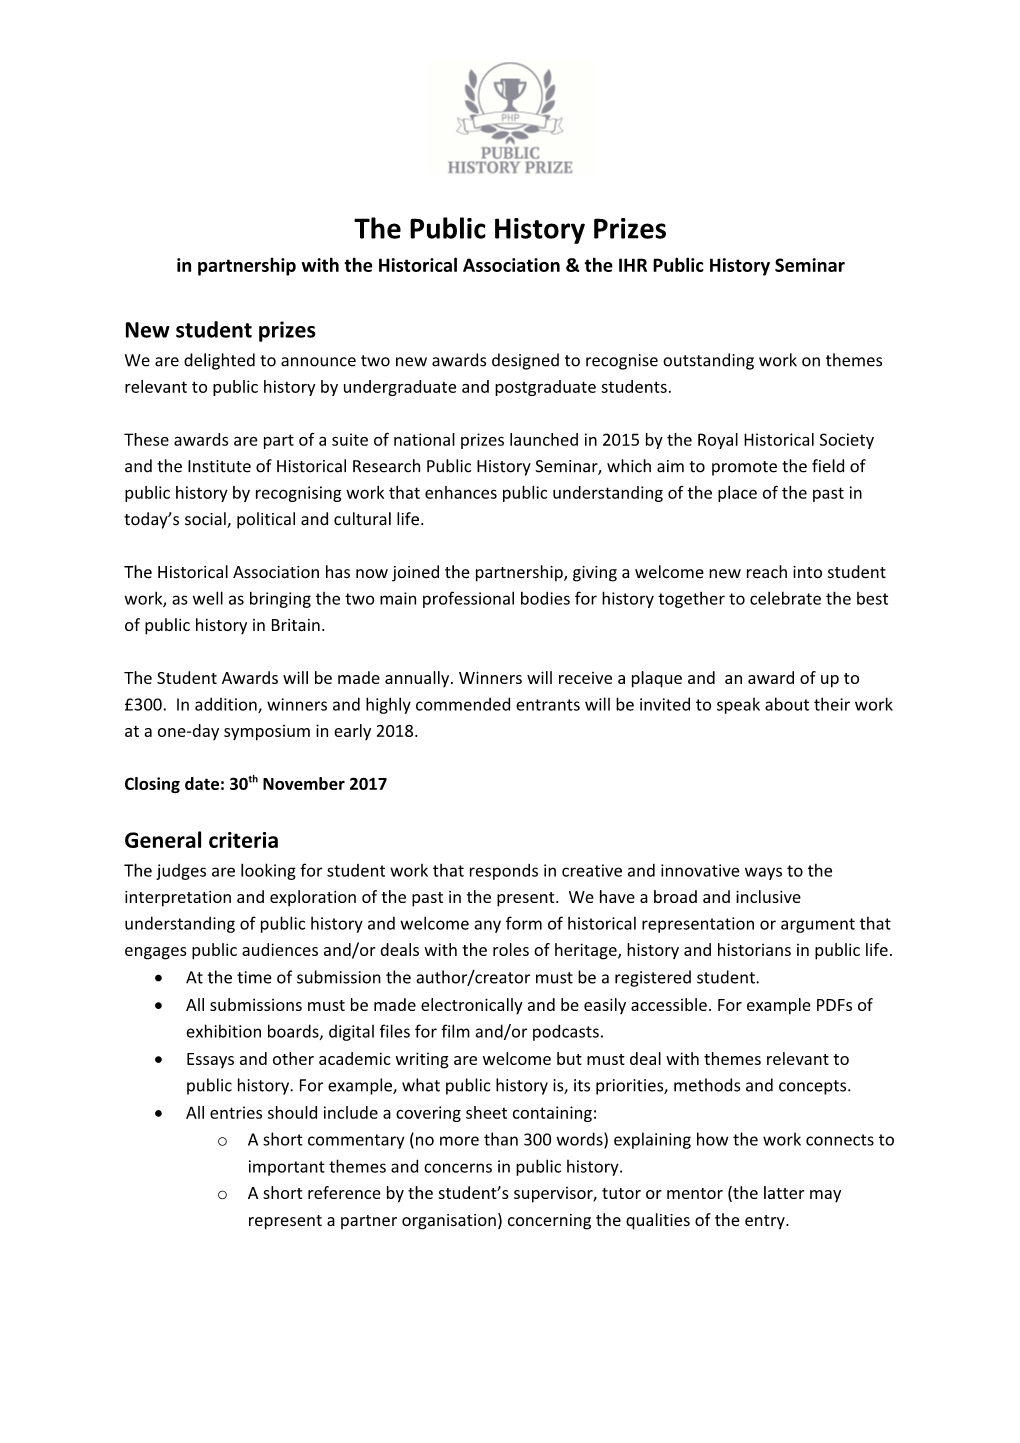 The Public History Prizes